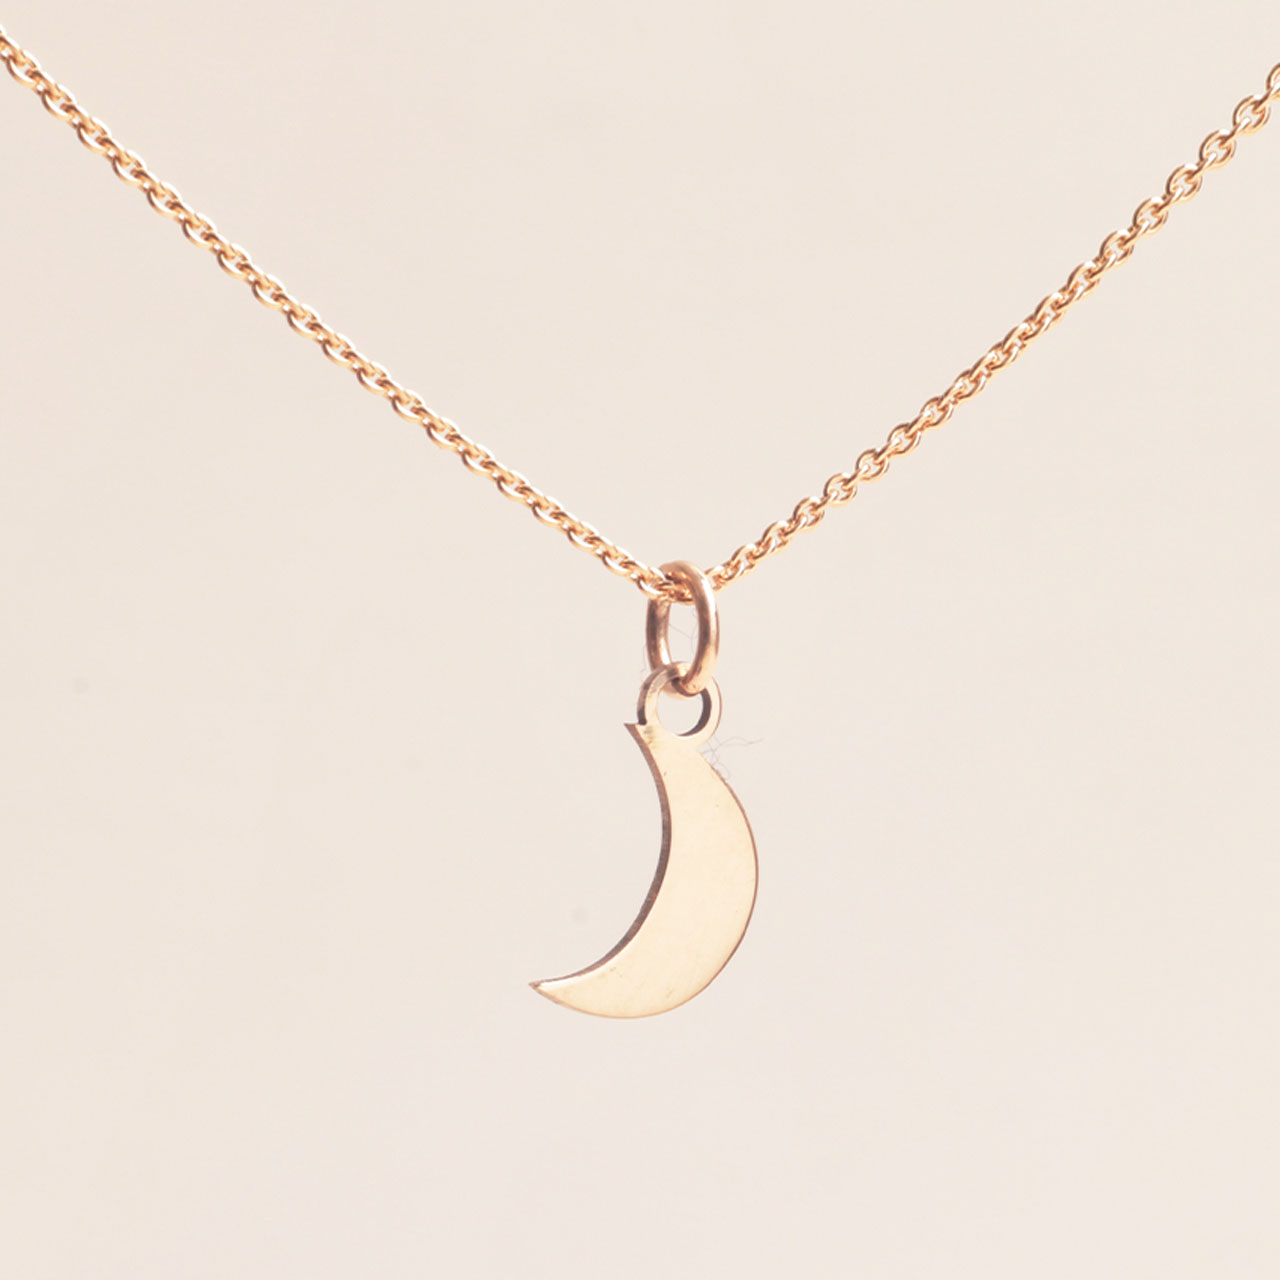 18k Gold Filled Small Crescent Moon Pendant Necklace